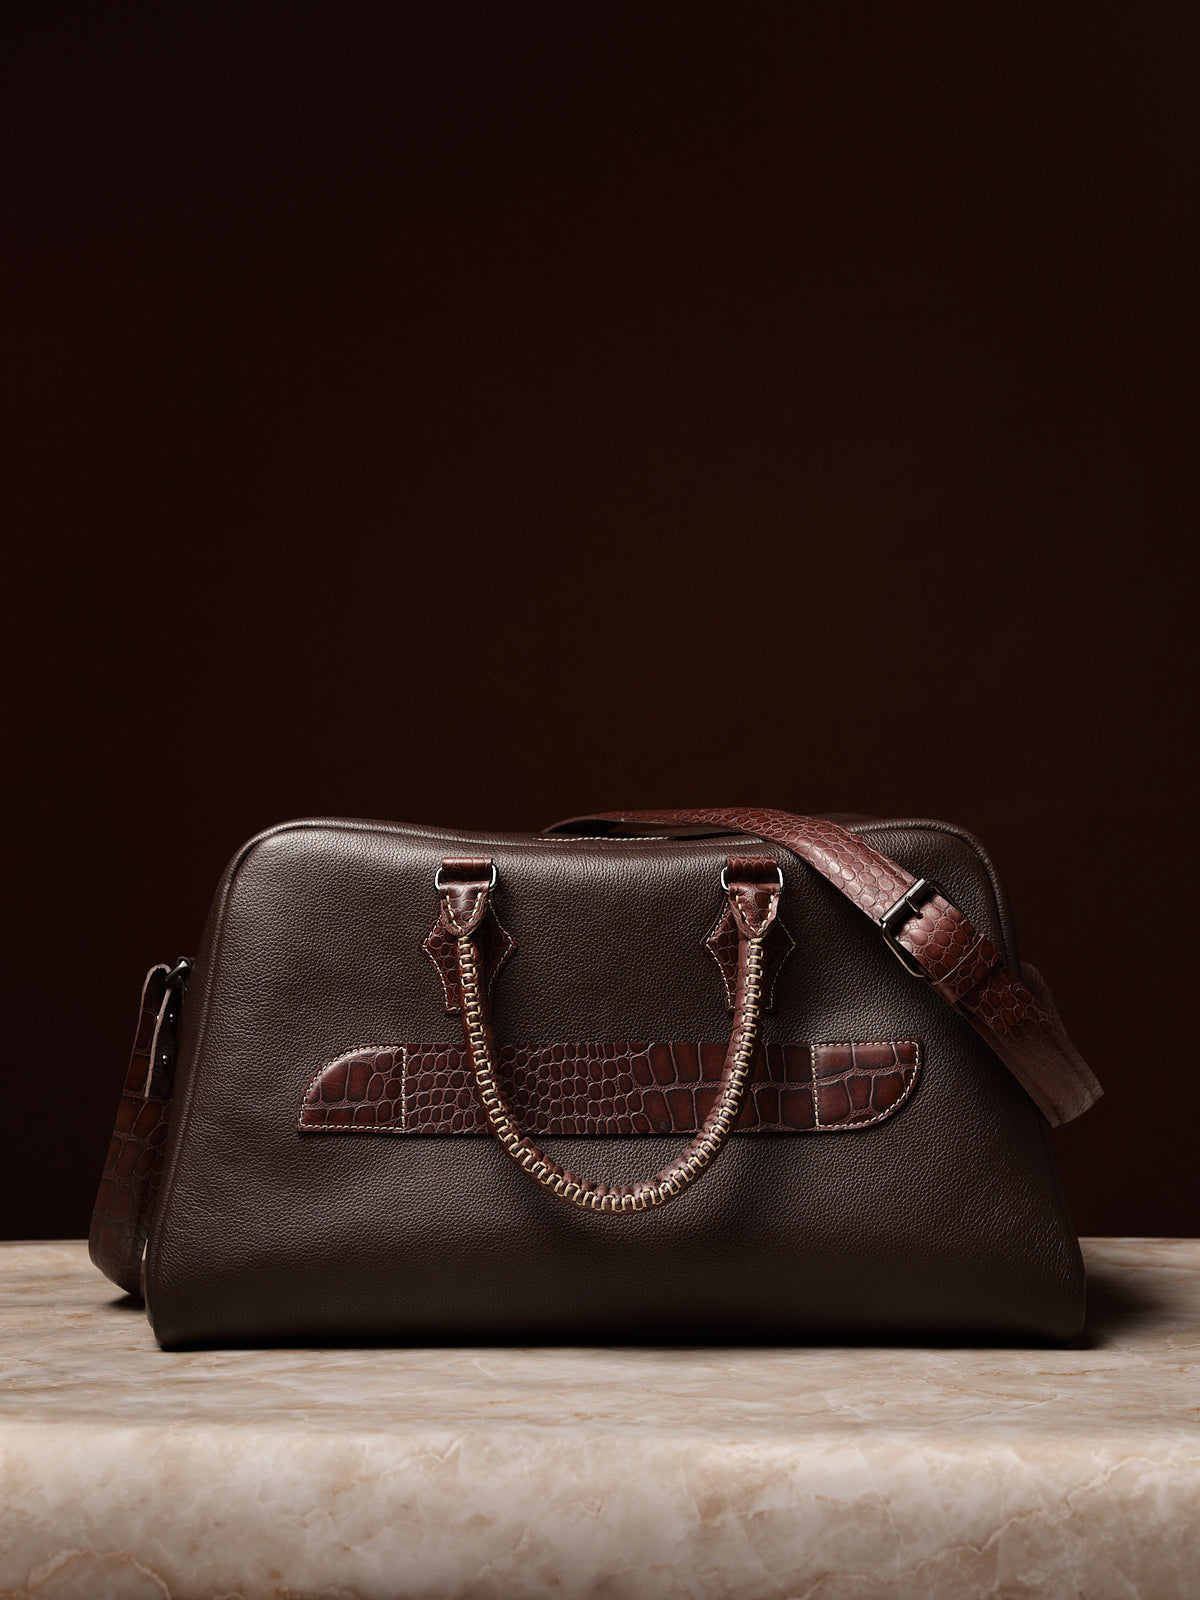 Limited Edtion Travel Bag. Large Duffle Bag Dark Brown by Capra Leather